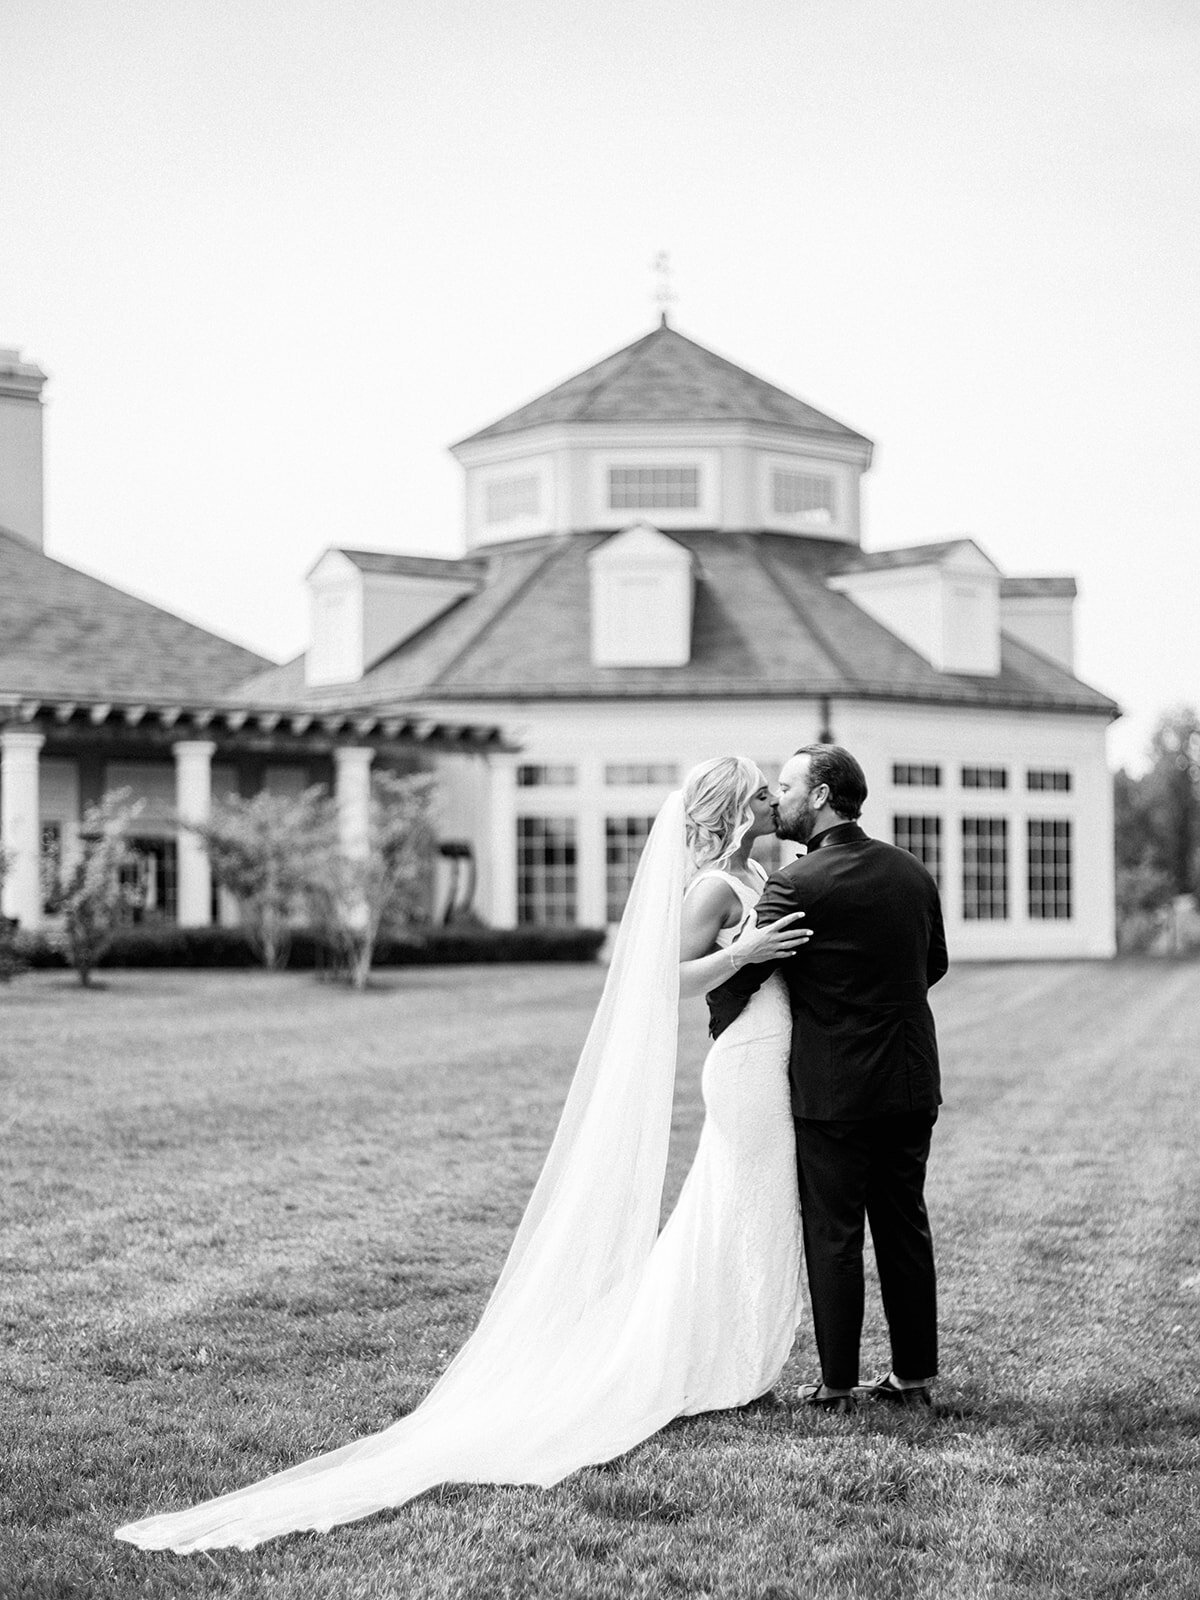 bride and groom share a kiss in front of venue in this black and white image